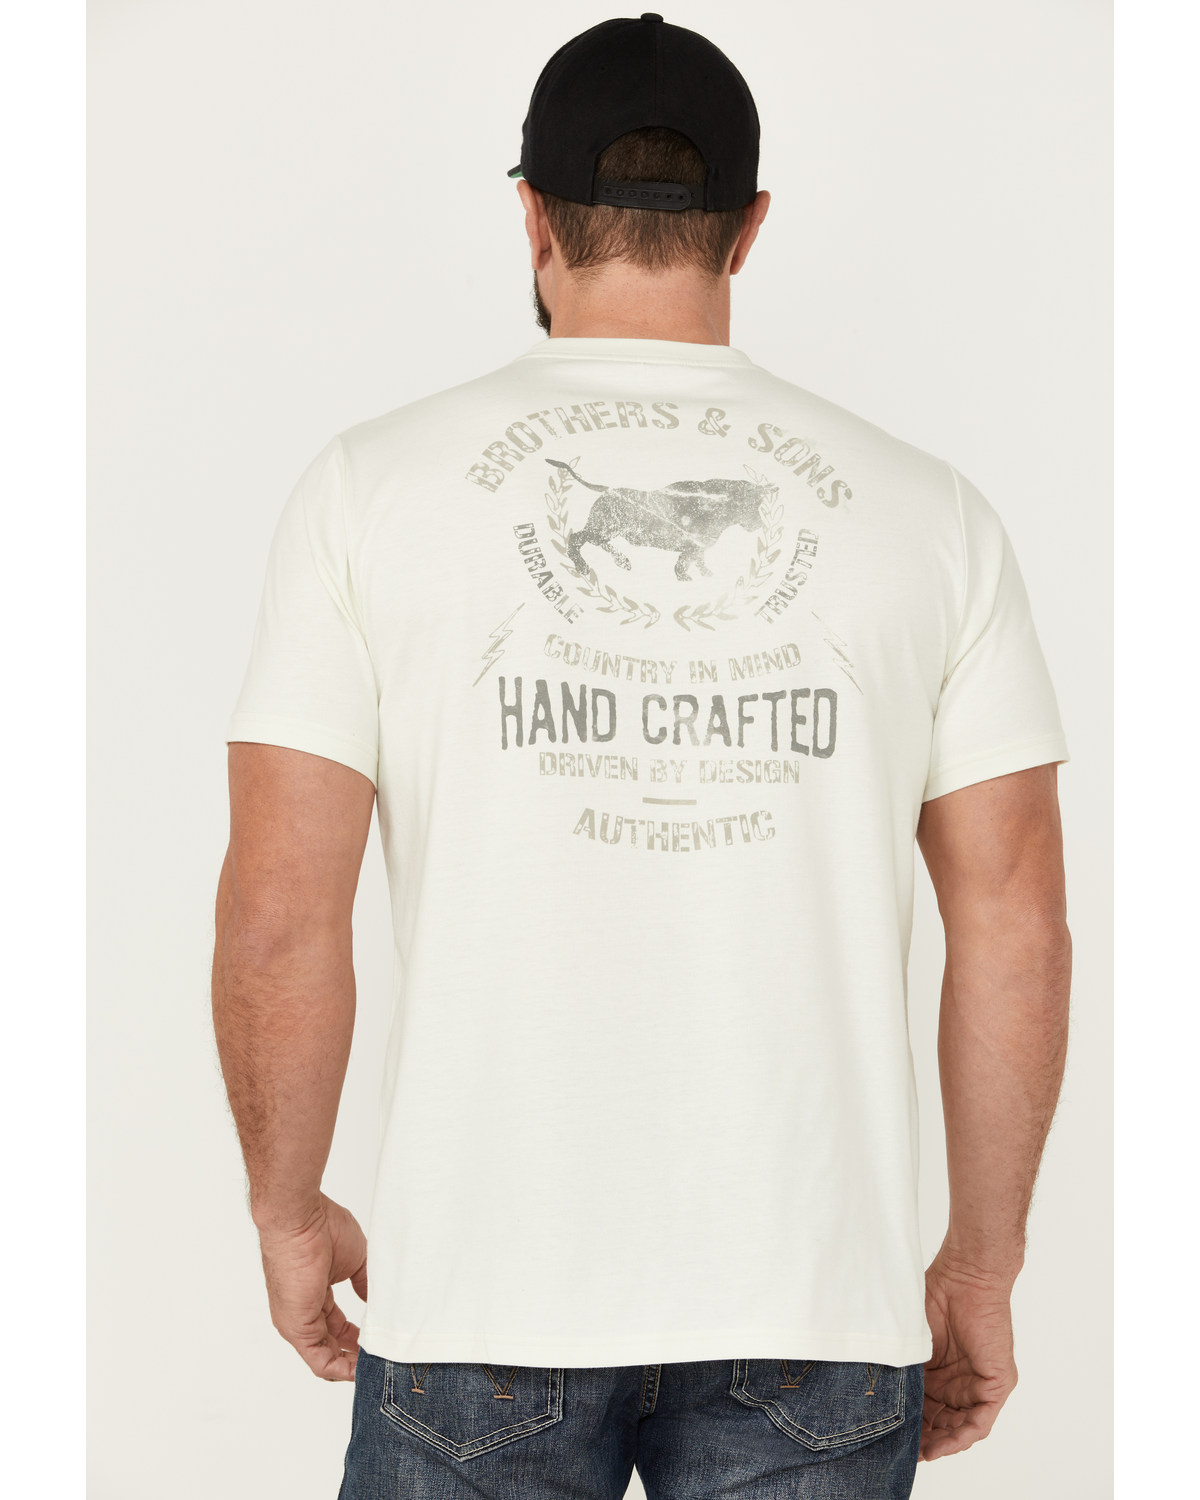 Brothers and Sons Men's Hand Crafted Short Sleeve Graphic T-Shirt